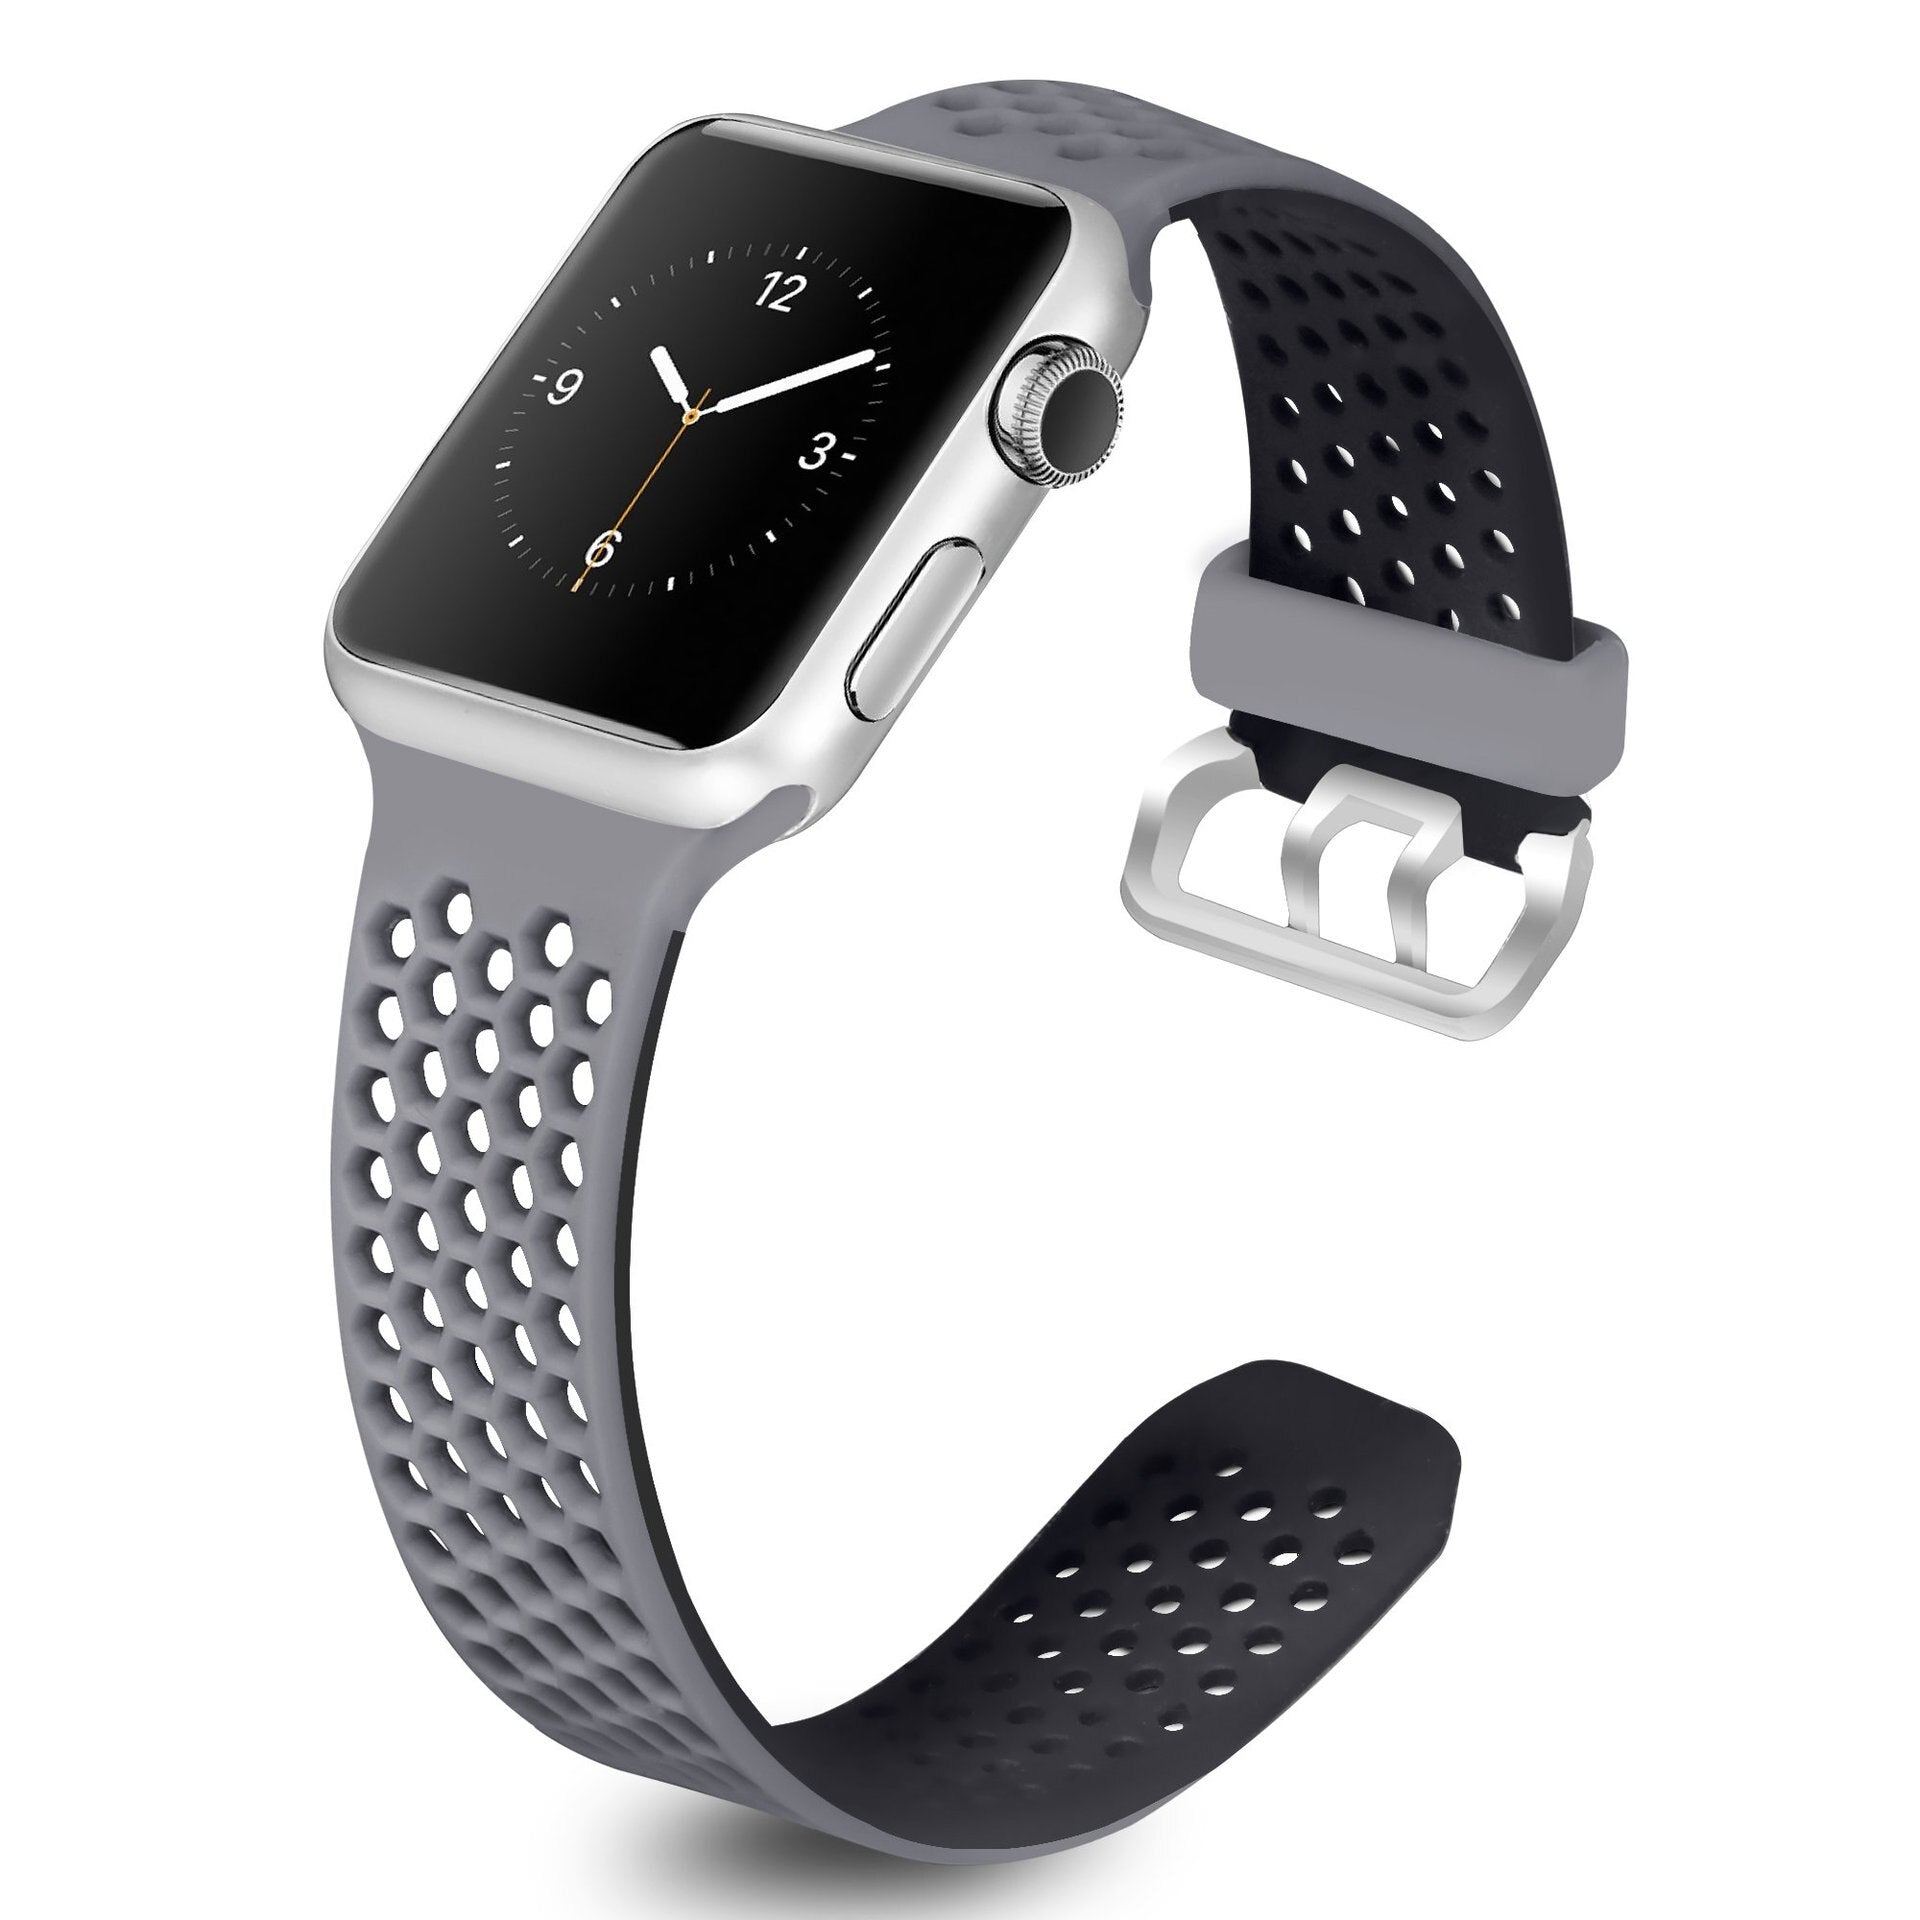 Strap for Apple Watch 5 Band 40mm 44mm iWatch series 4 5 6 SE Sport Belt Silicone bracelet for Apple watch band 42mm 38mm - 200000127 United States / gray / 38 or 40 mm Find Epic Store